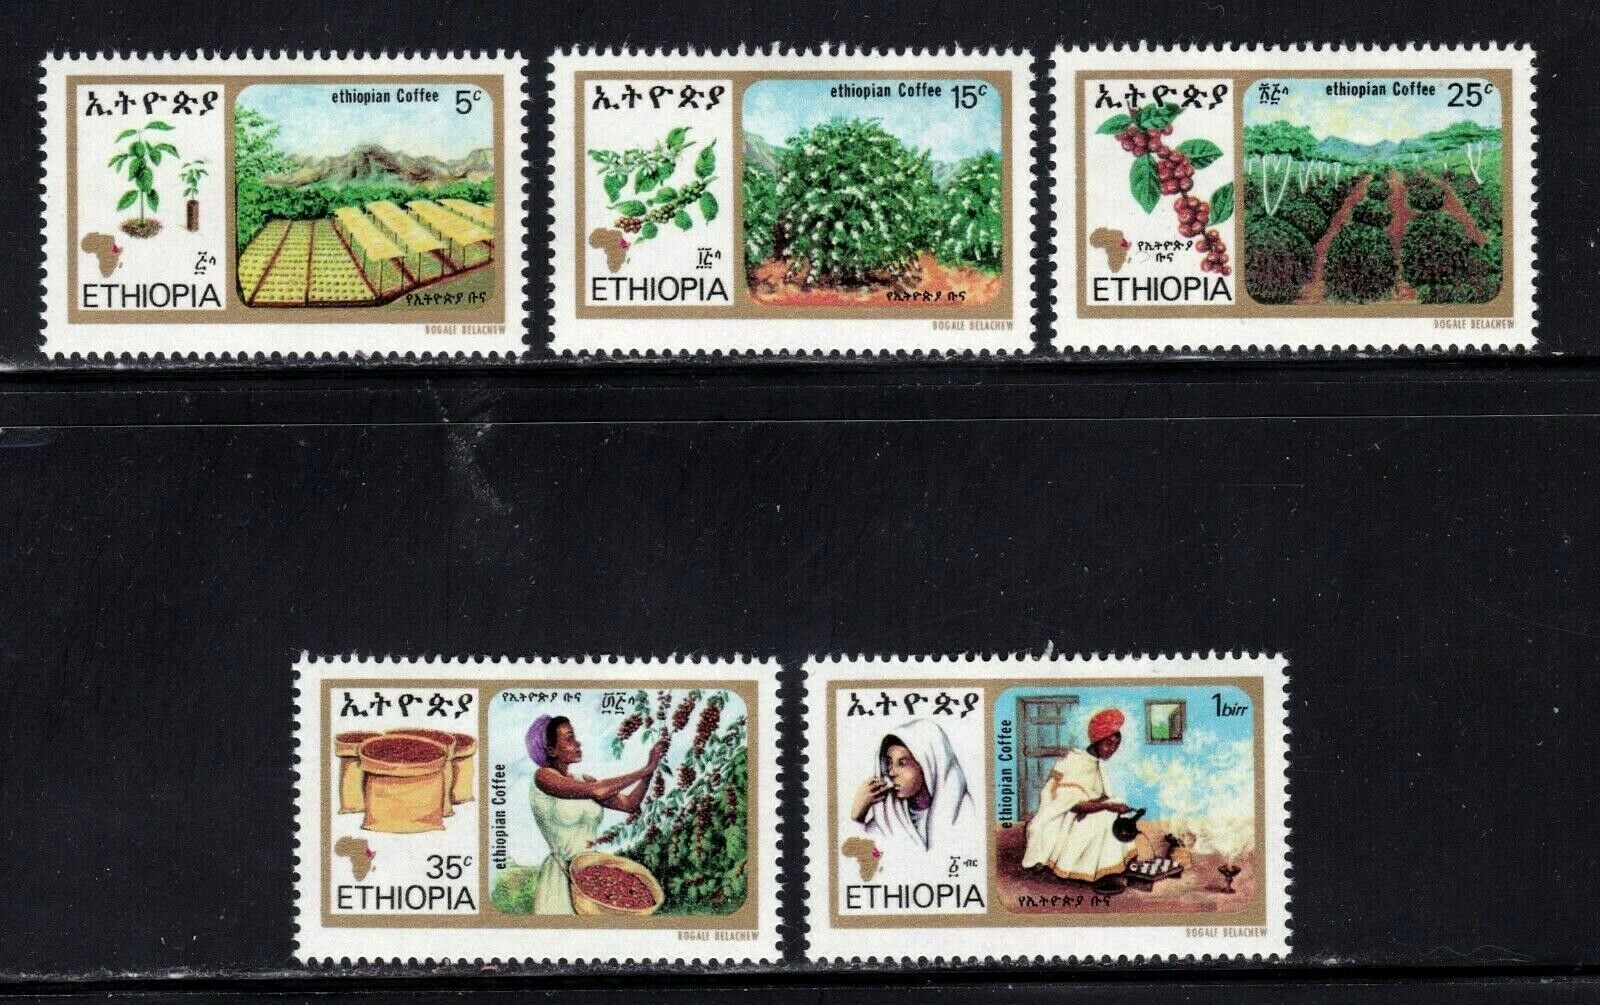 Ethiopia stamps #1033 - 1037, MHOG, VF - XF, complete set